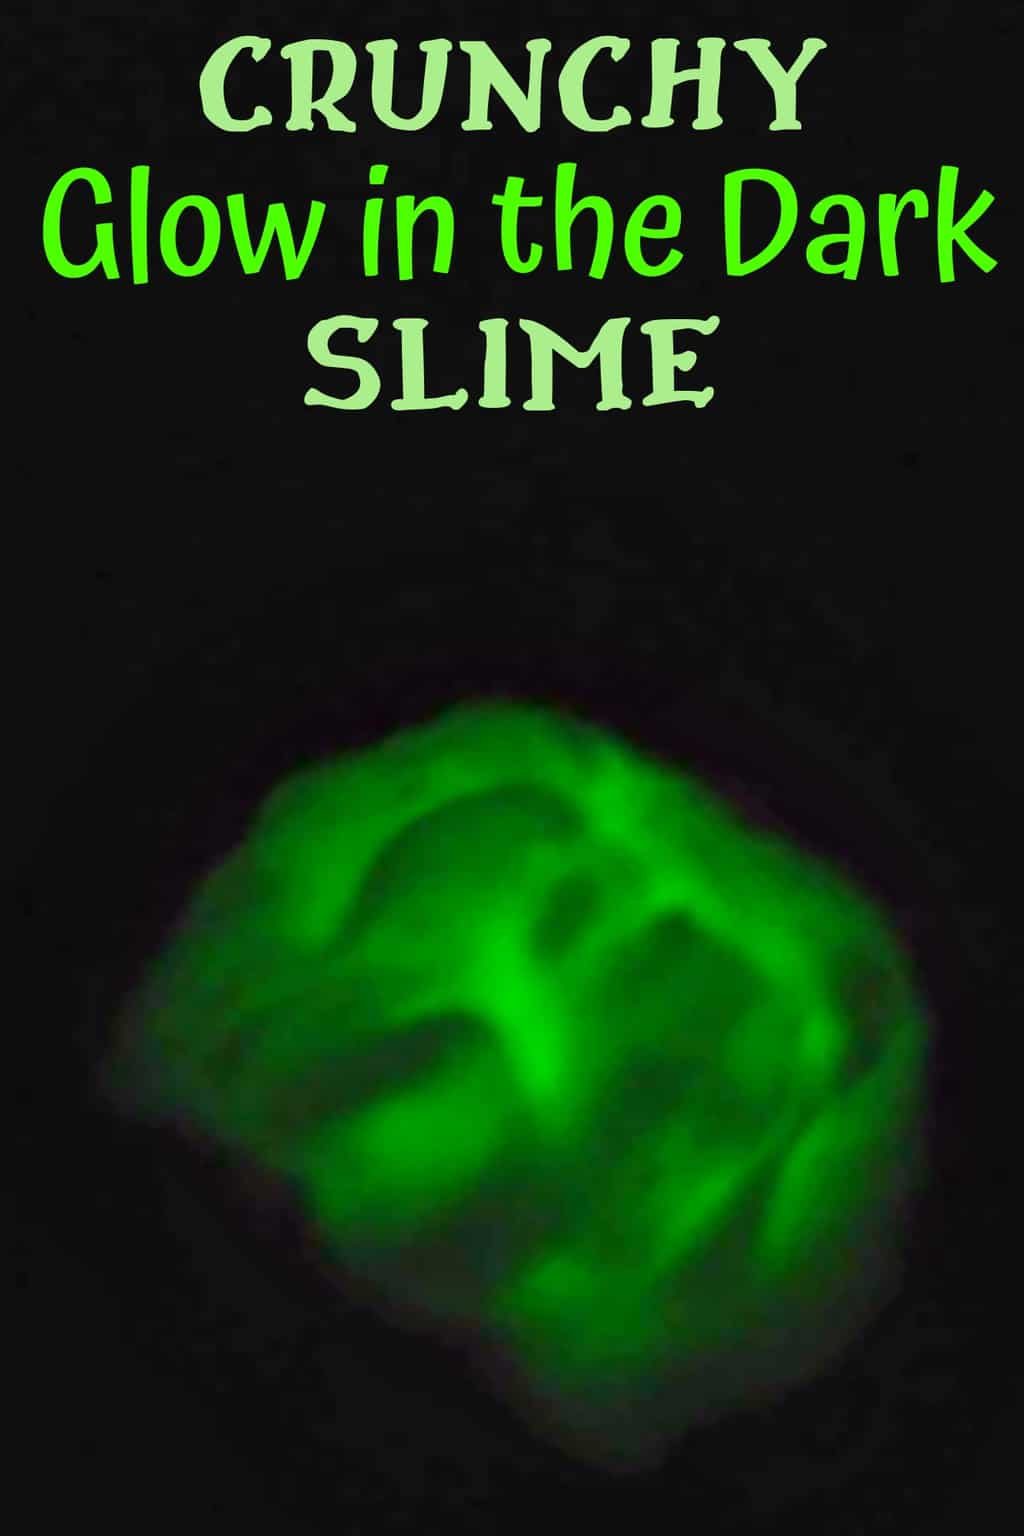 If you are looking for an easy slime recipe for the kids, you will love this DIY crunchy glow in the dark slime.